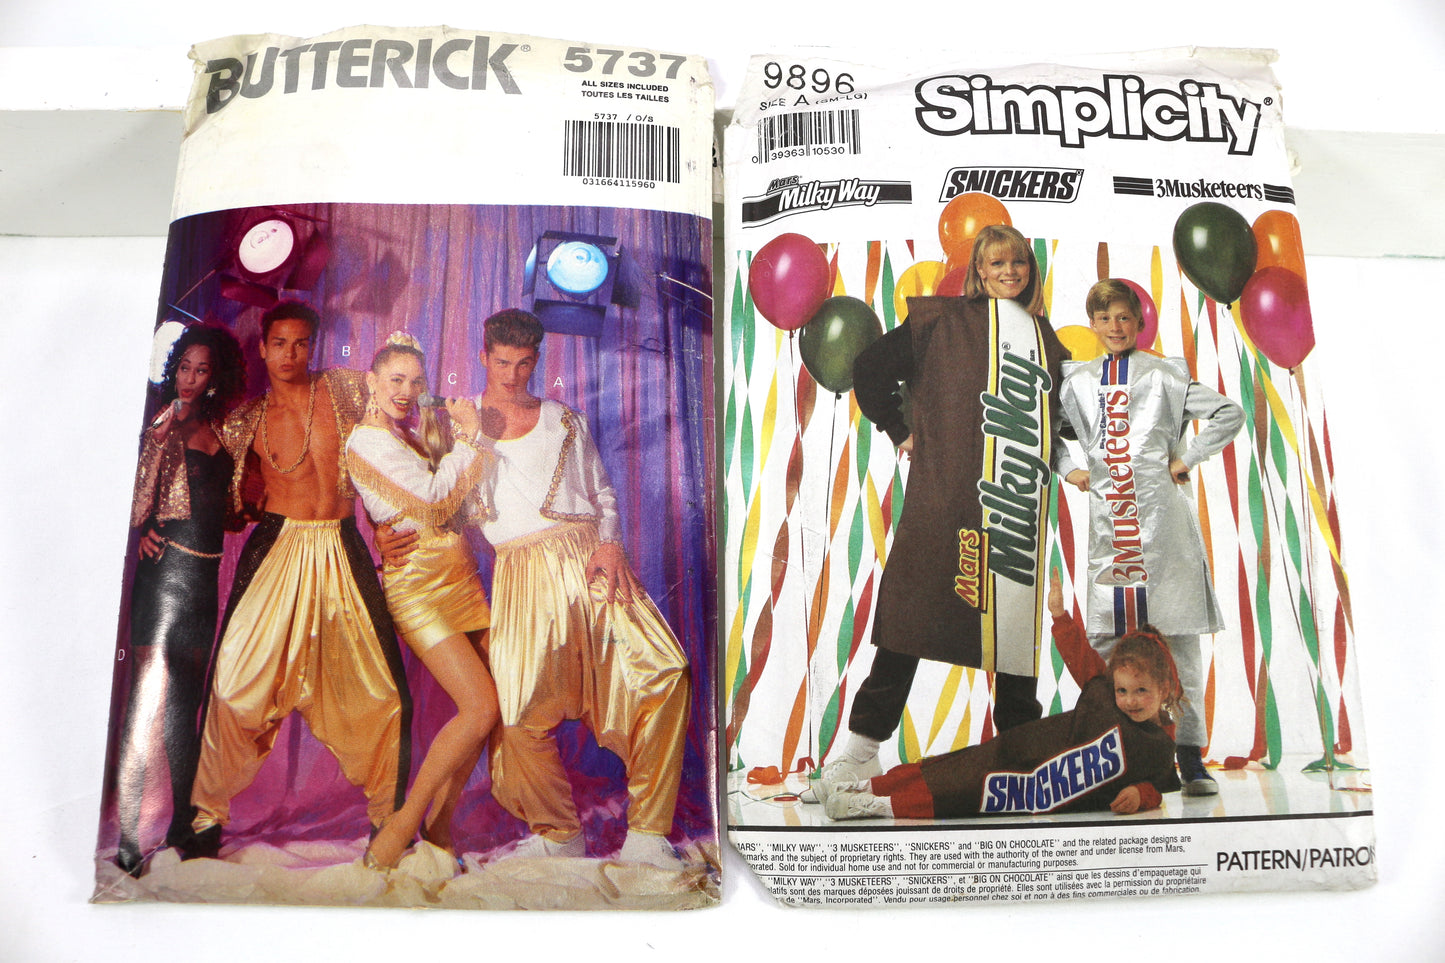 Butterick 5737 Adult Costume Sewing Pattern or Simplicity 9896 Candy Bar Costume Sewing Pattern